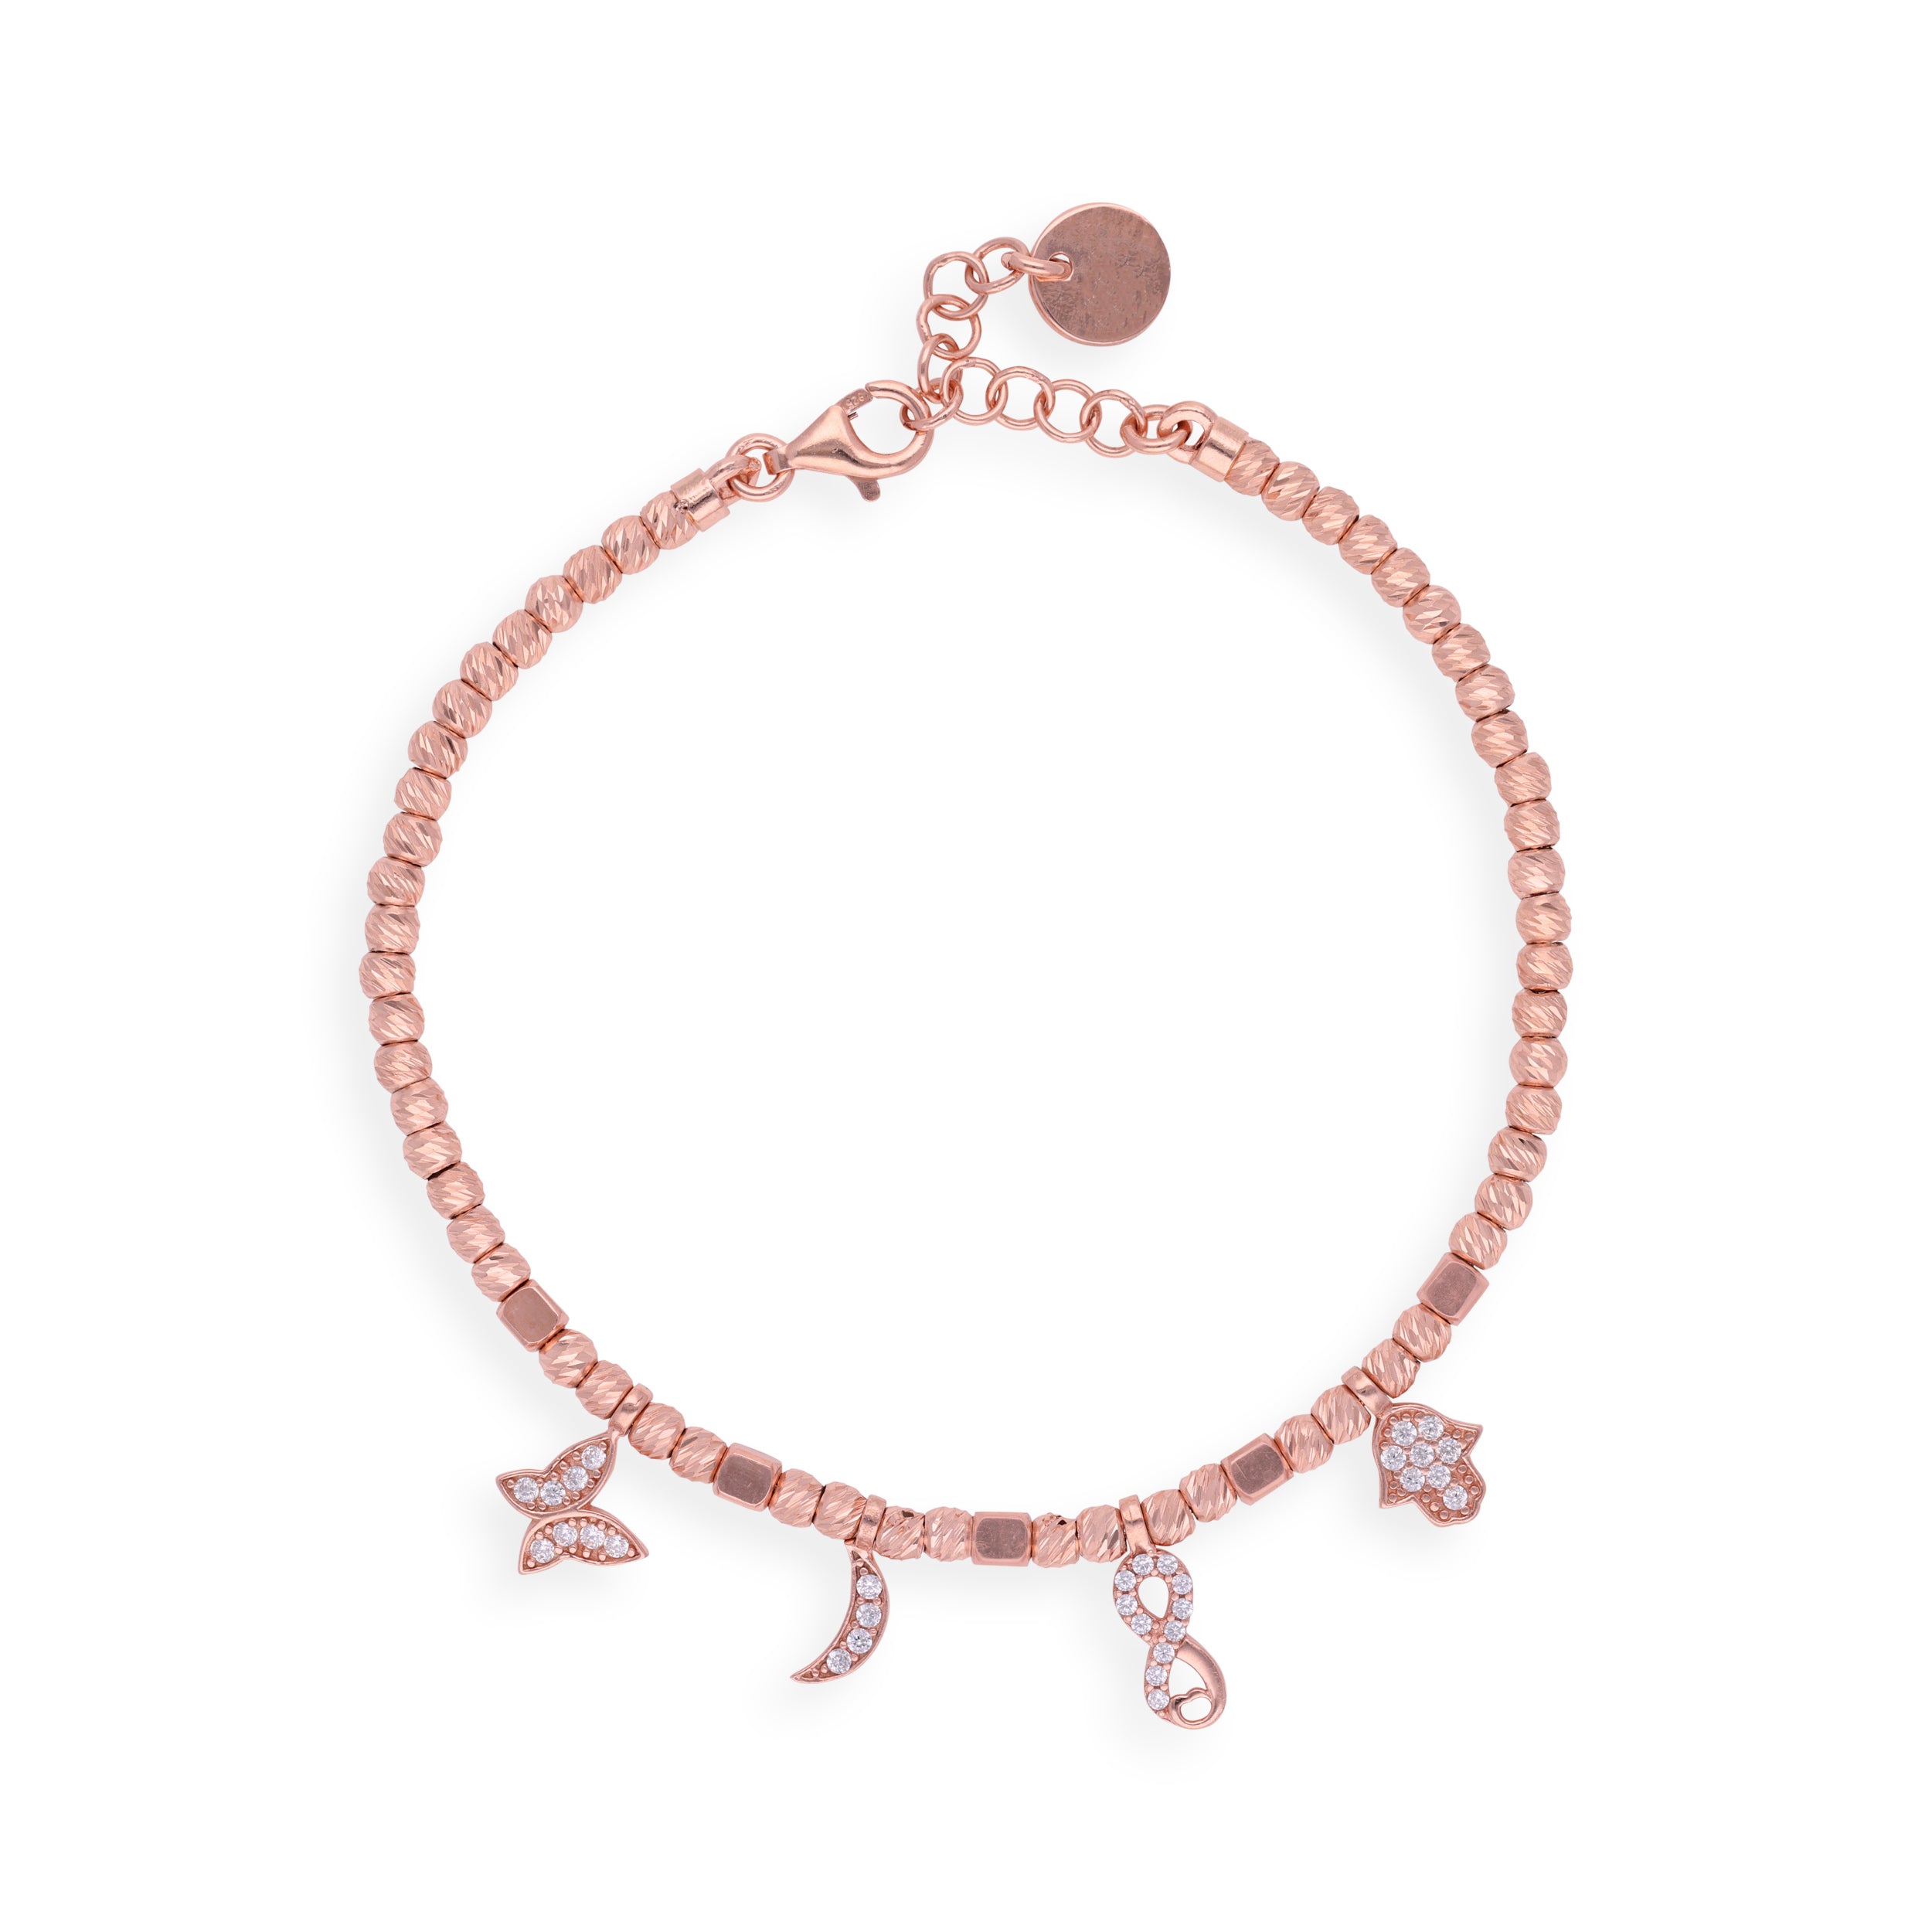 Enchanted Rose Gold Celestial Charm Bracelet with Diamond Accents | SKU:0003109960